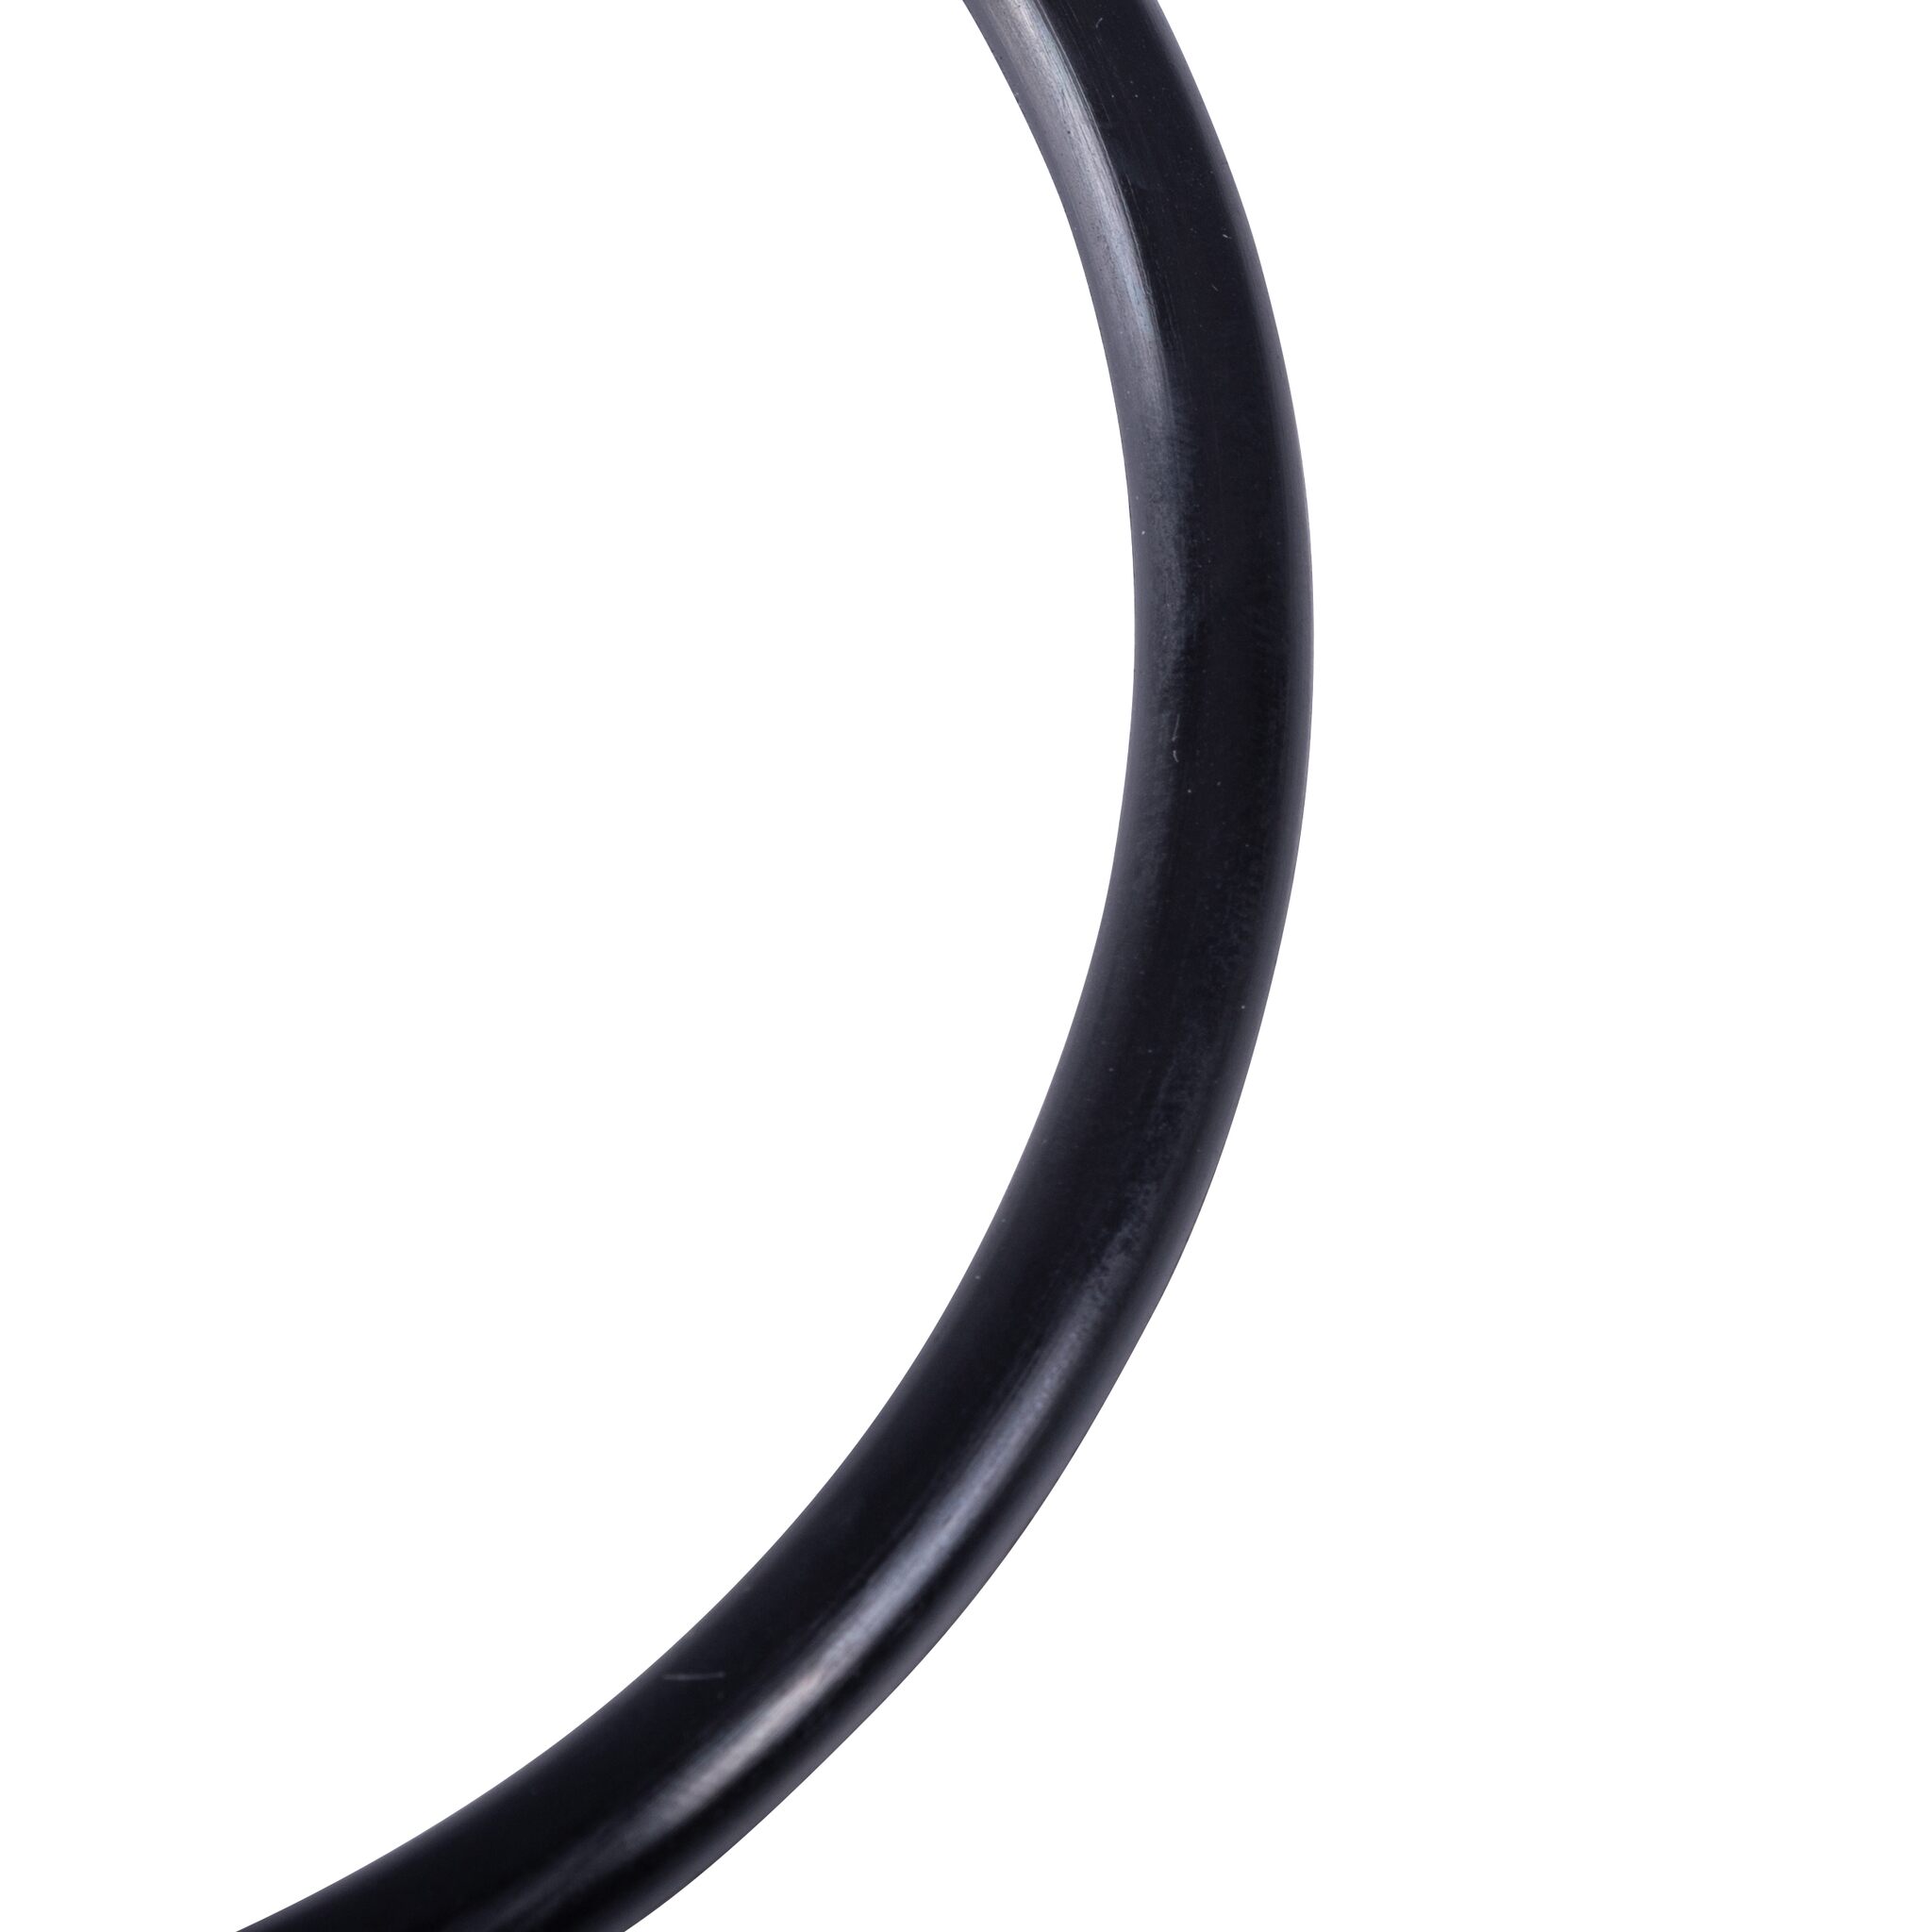 VETUS replacement gasket for cooling water filter 330